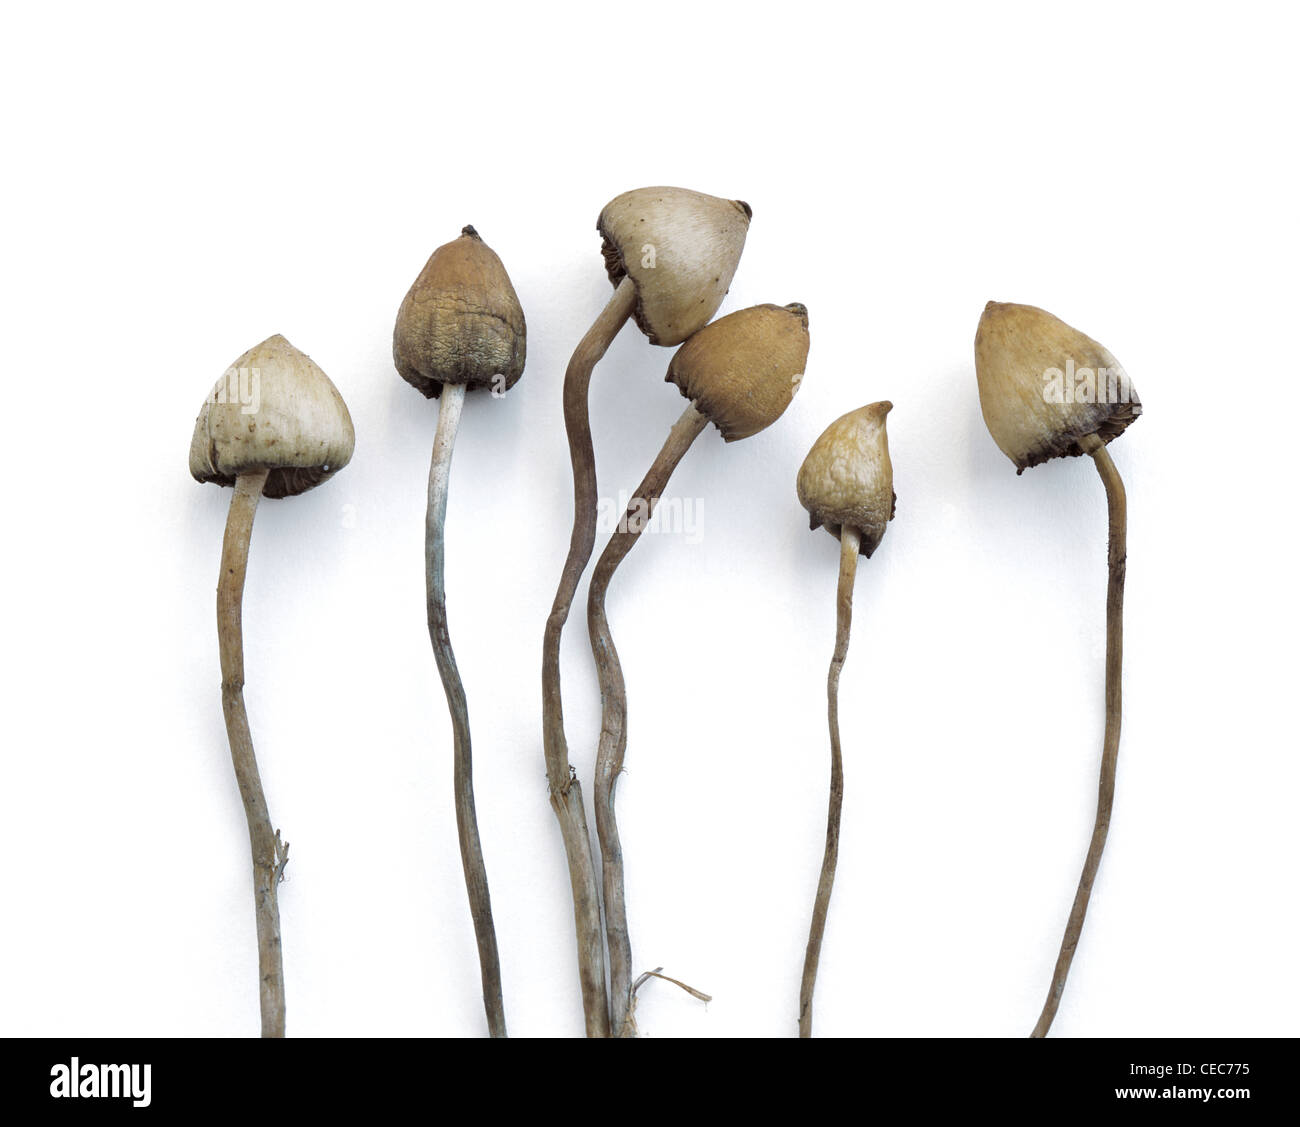 Liberty Caps High Resolution Stock Photography and Images - Alamy